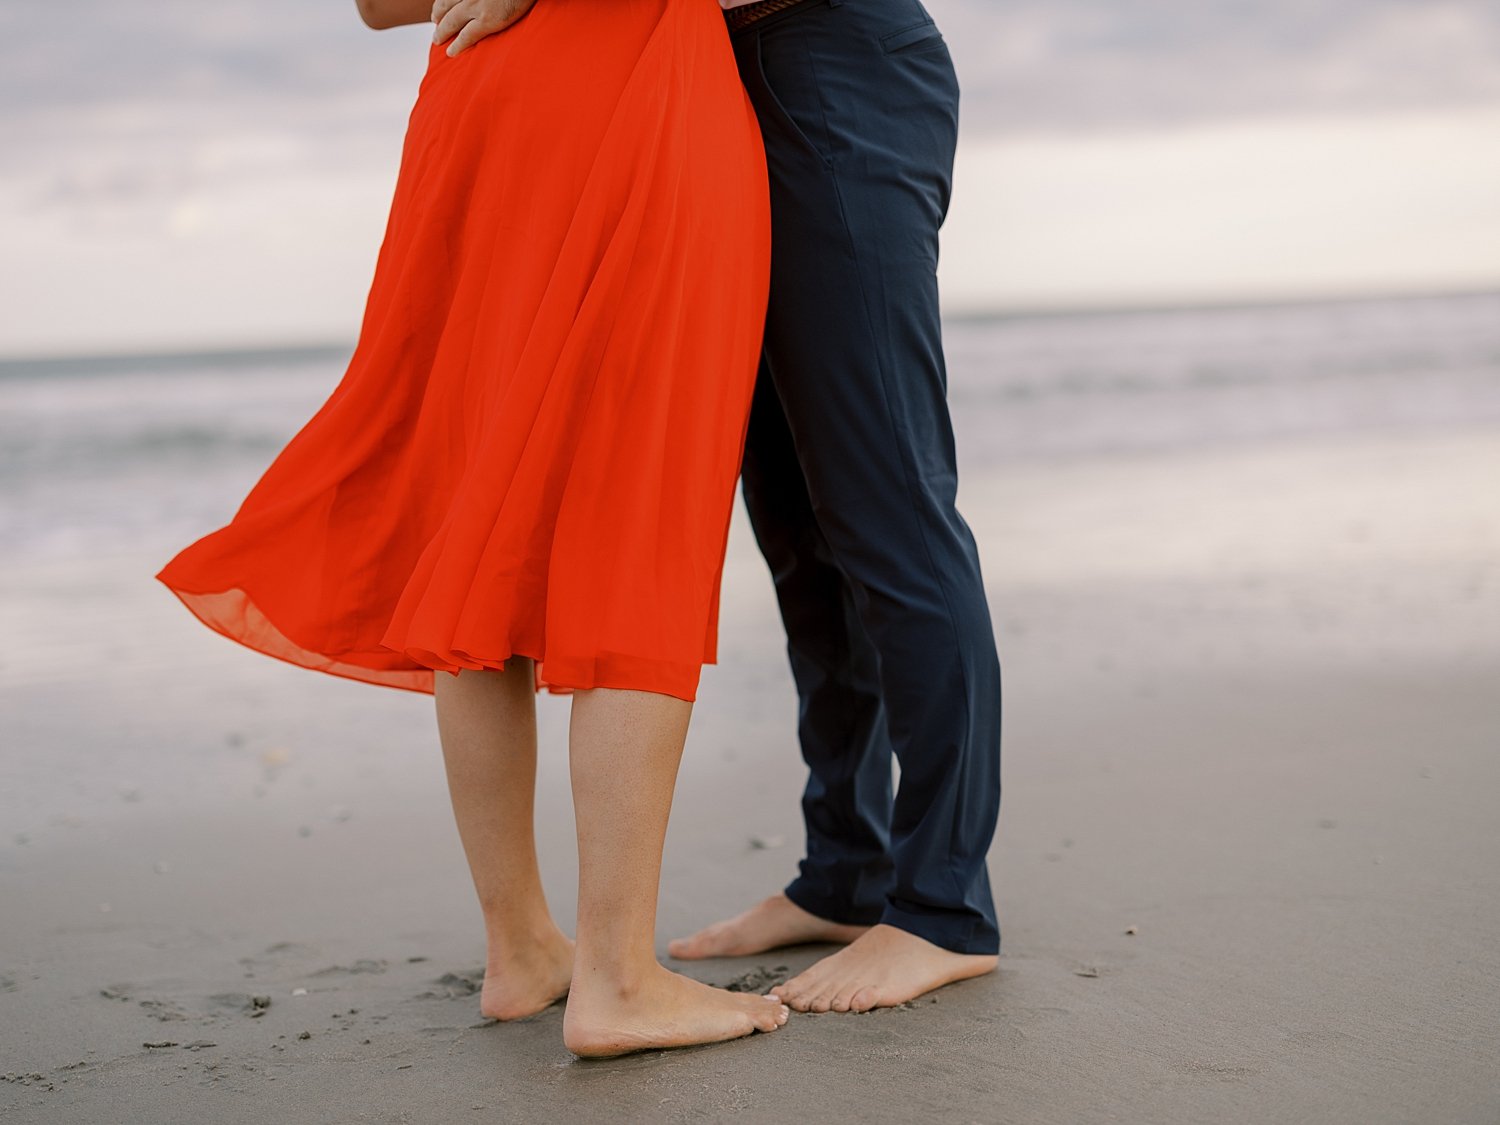 engaged couple hugs their toes touching on wet sand on beach in Ocean City NJ